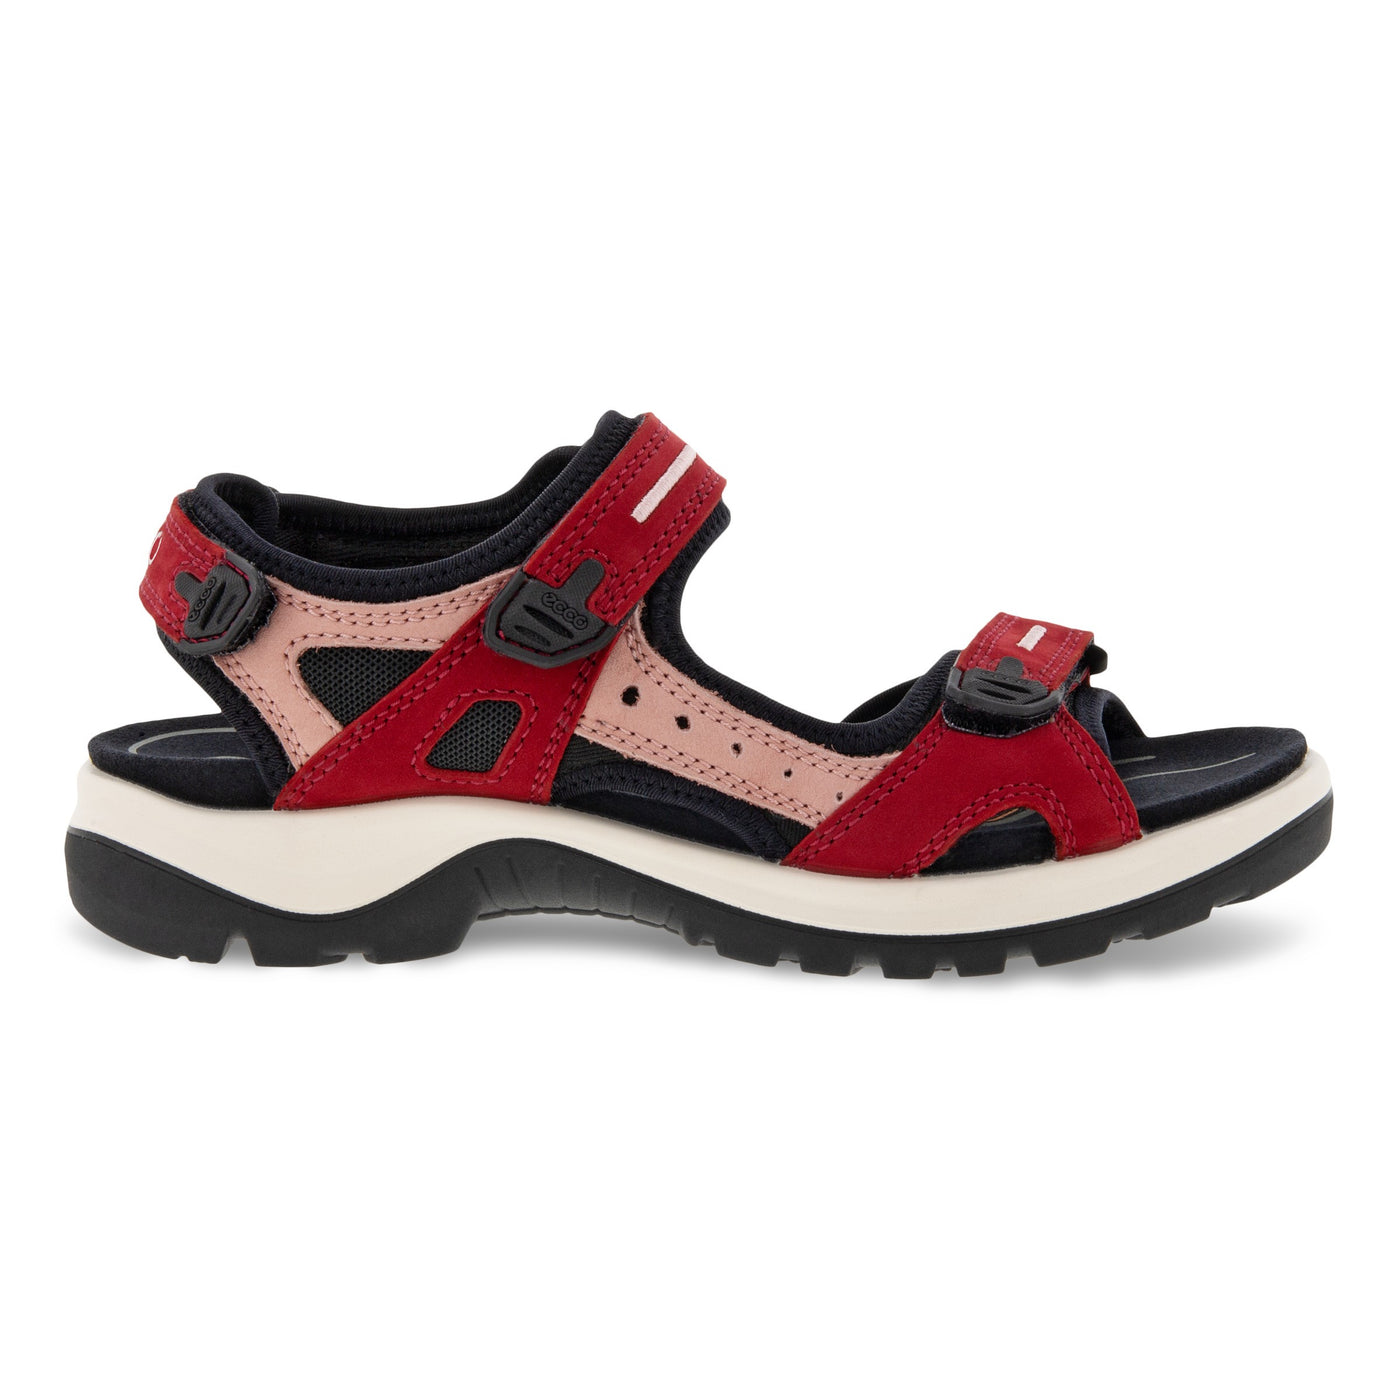 ECCO Offroad - Chilli Red/Damask Rose